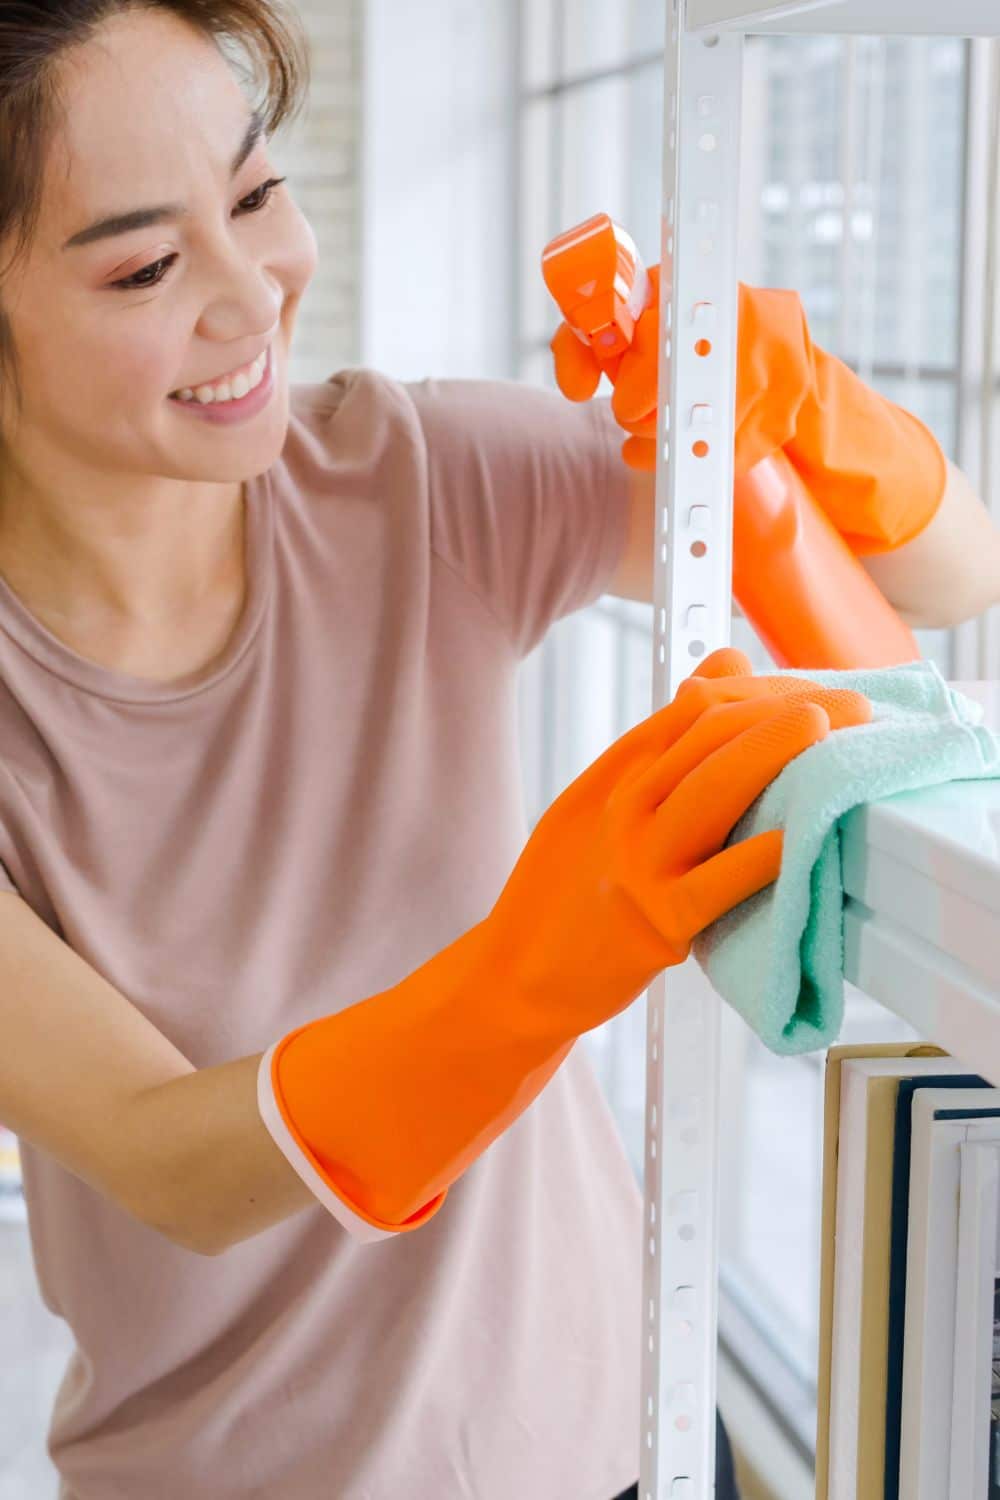 Making Your Home Easier to Clean